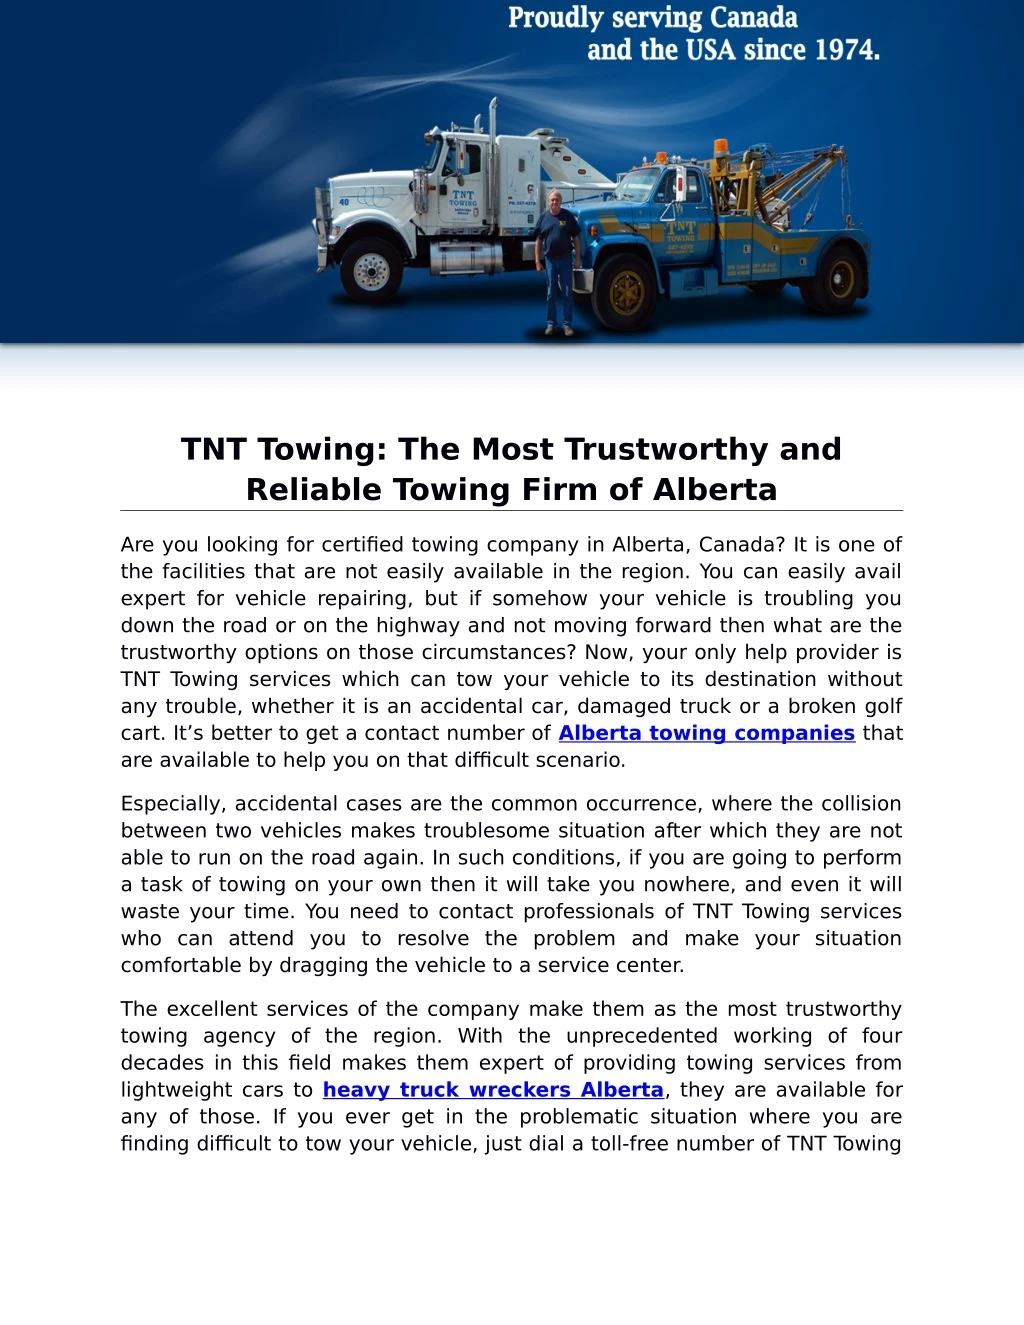 tnt towing the most trustworthy and reliable